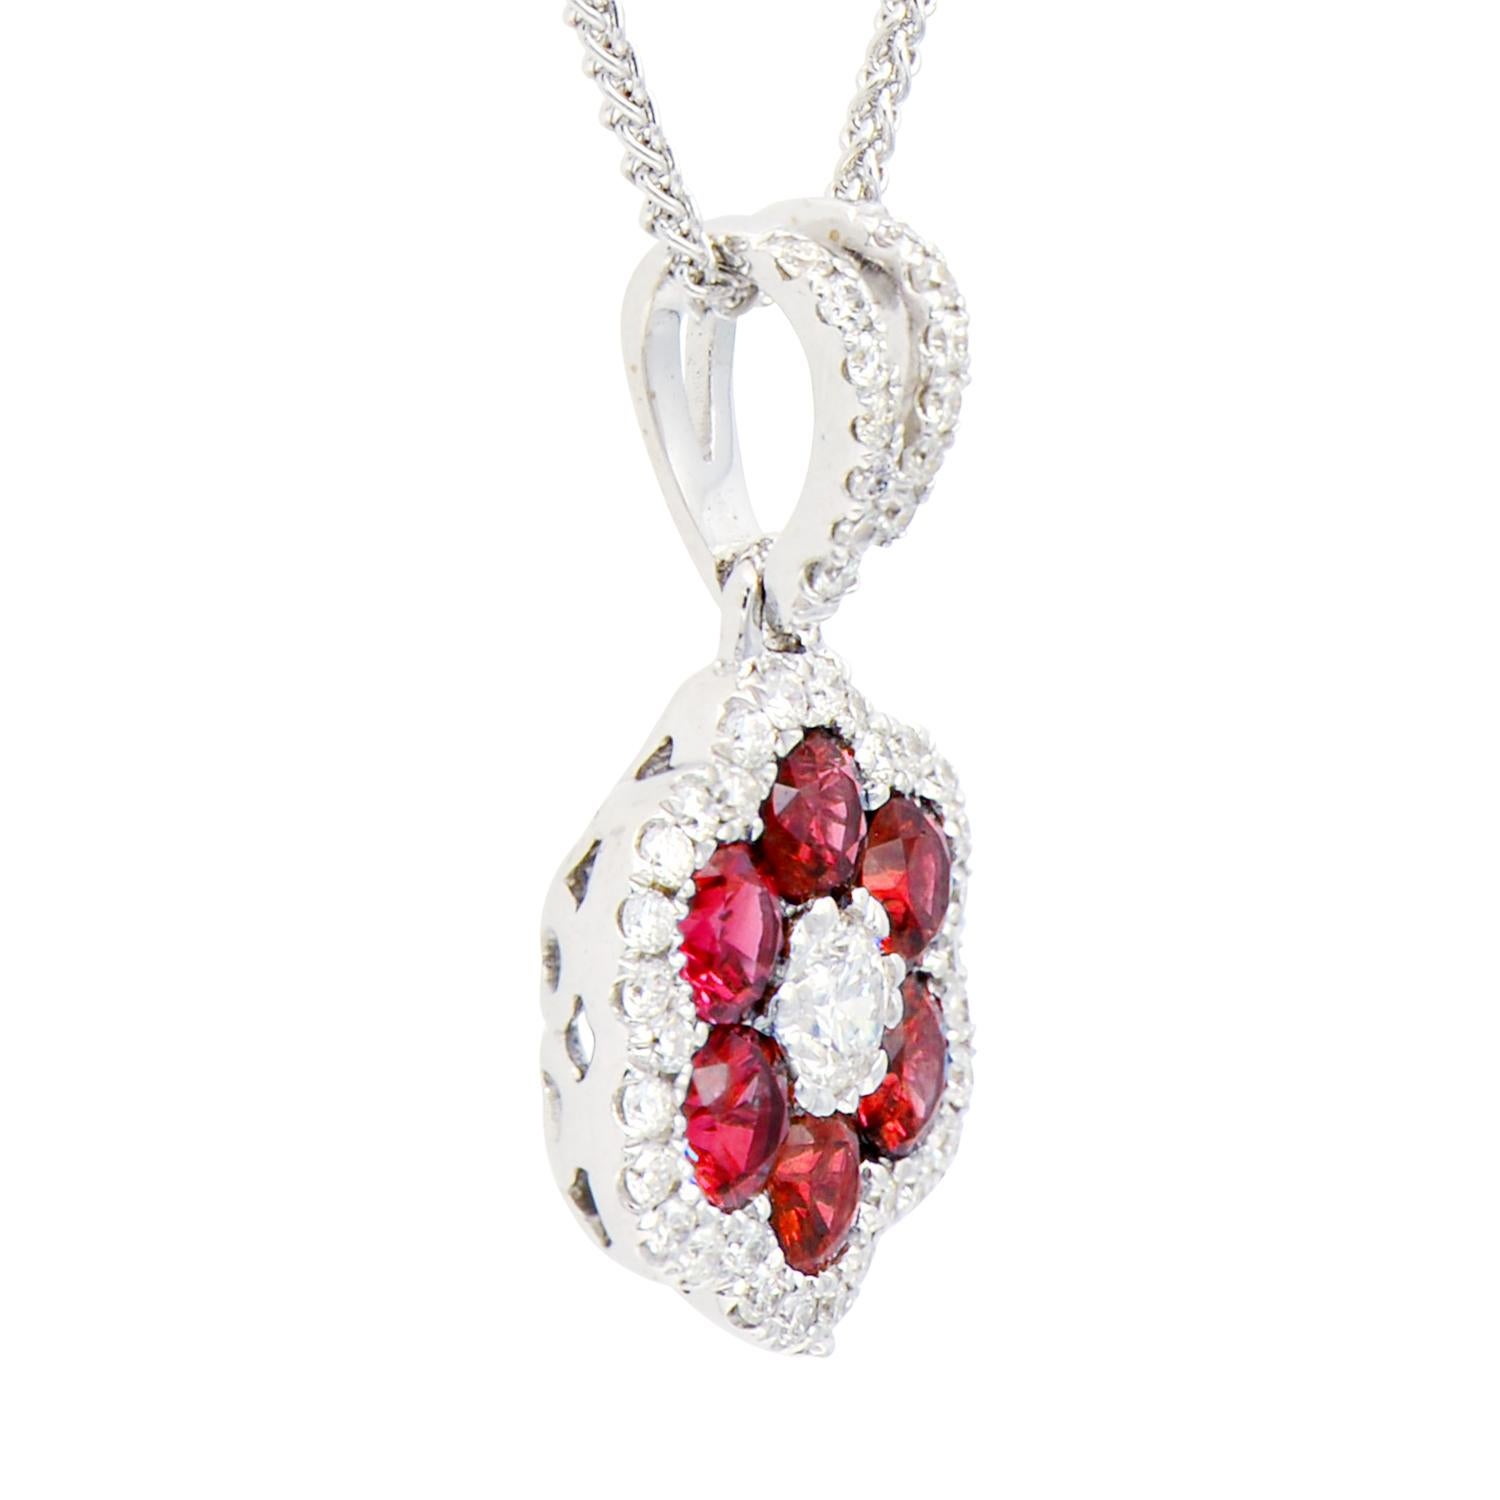 This beautiful pendant is made from 1.8 grams of 18 karat white gold. The flower shape is made from 6 rubies totaling 0.73 carats with VS2, G color diamonds for the center and as a halo around the rubies as well as on the bail of the pendant. There